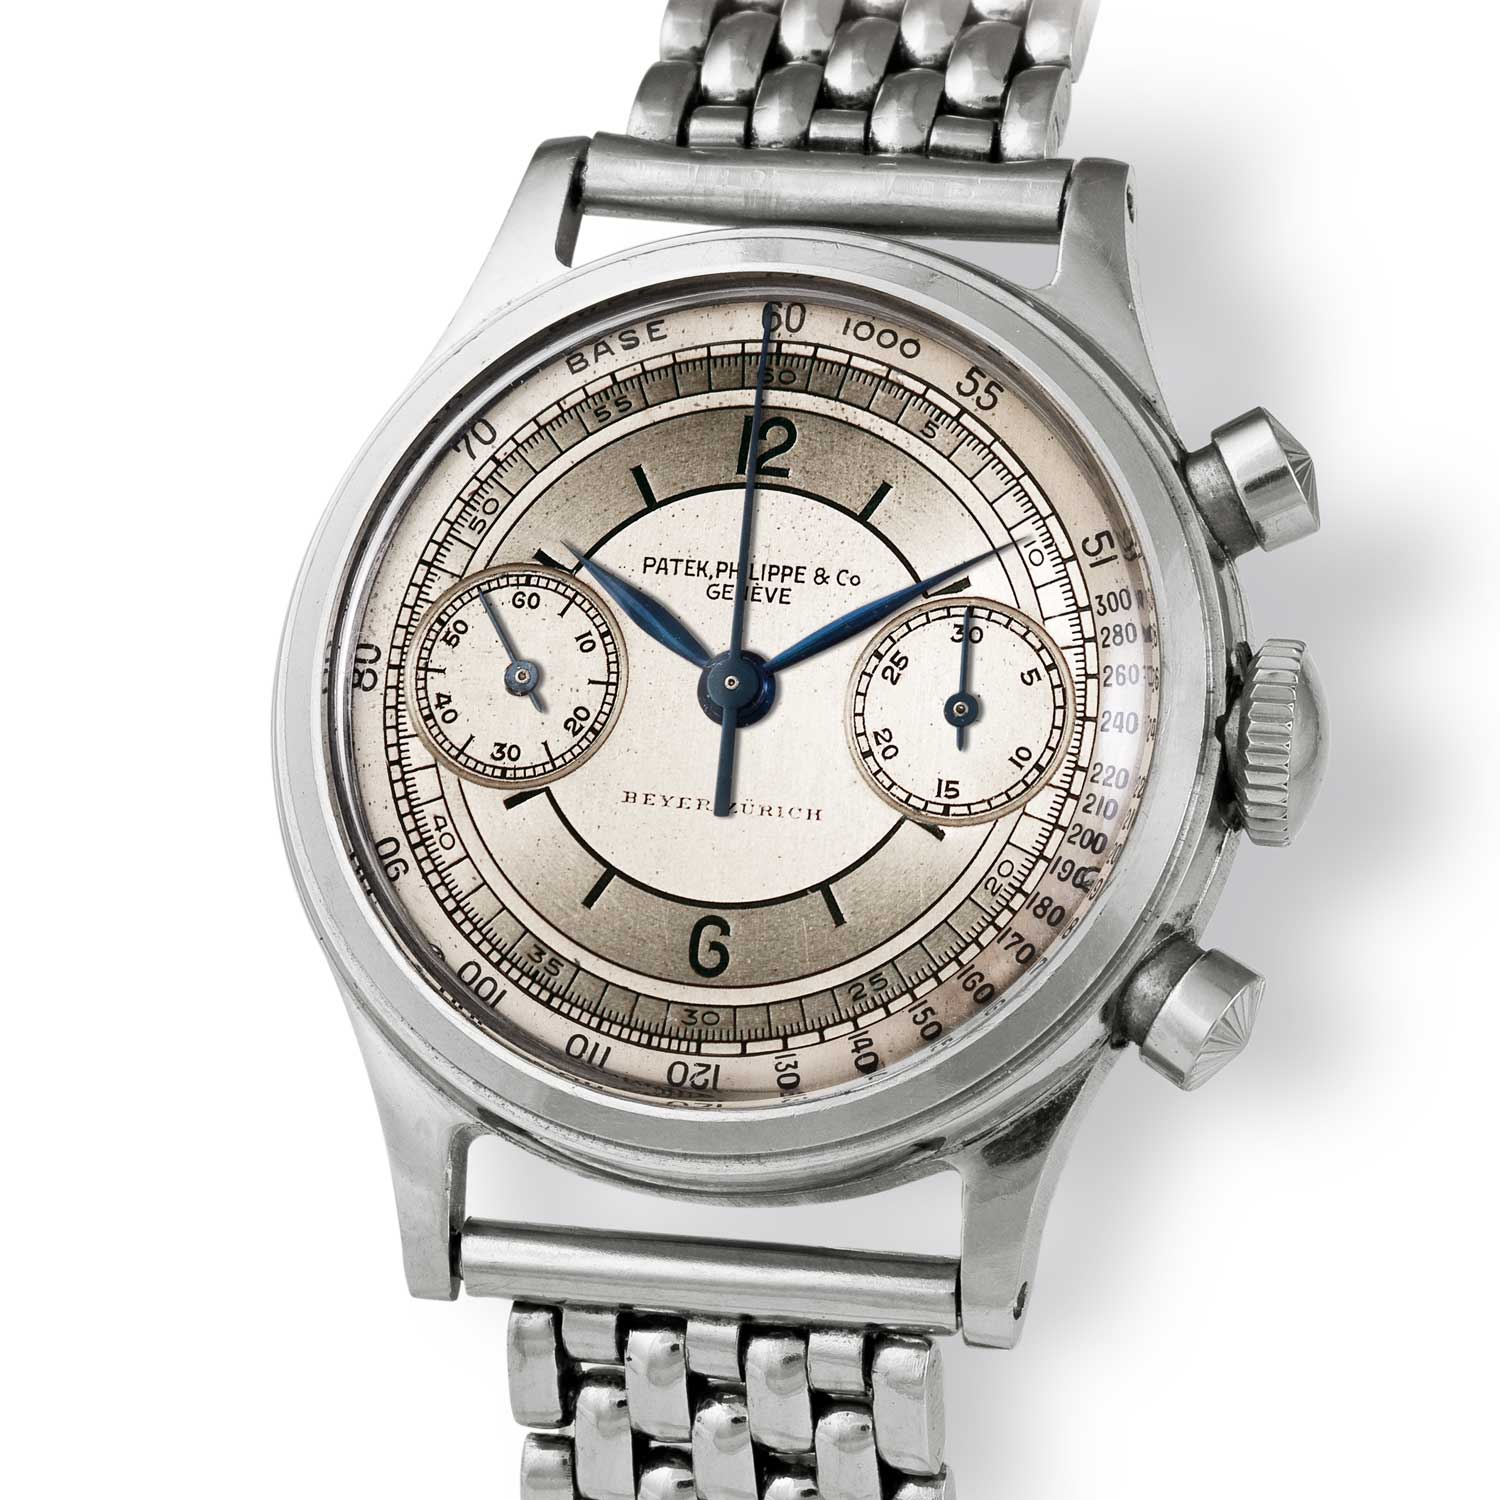 Patek Philippe ref. 1463 steel chronograph with sector dial (Image: John Goldberger)